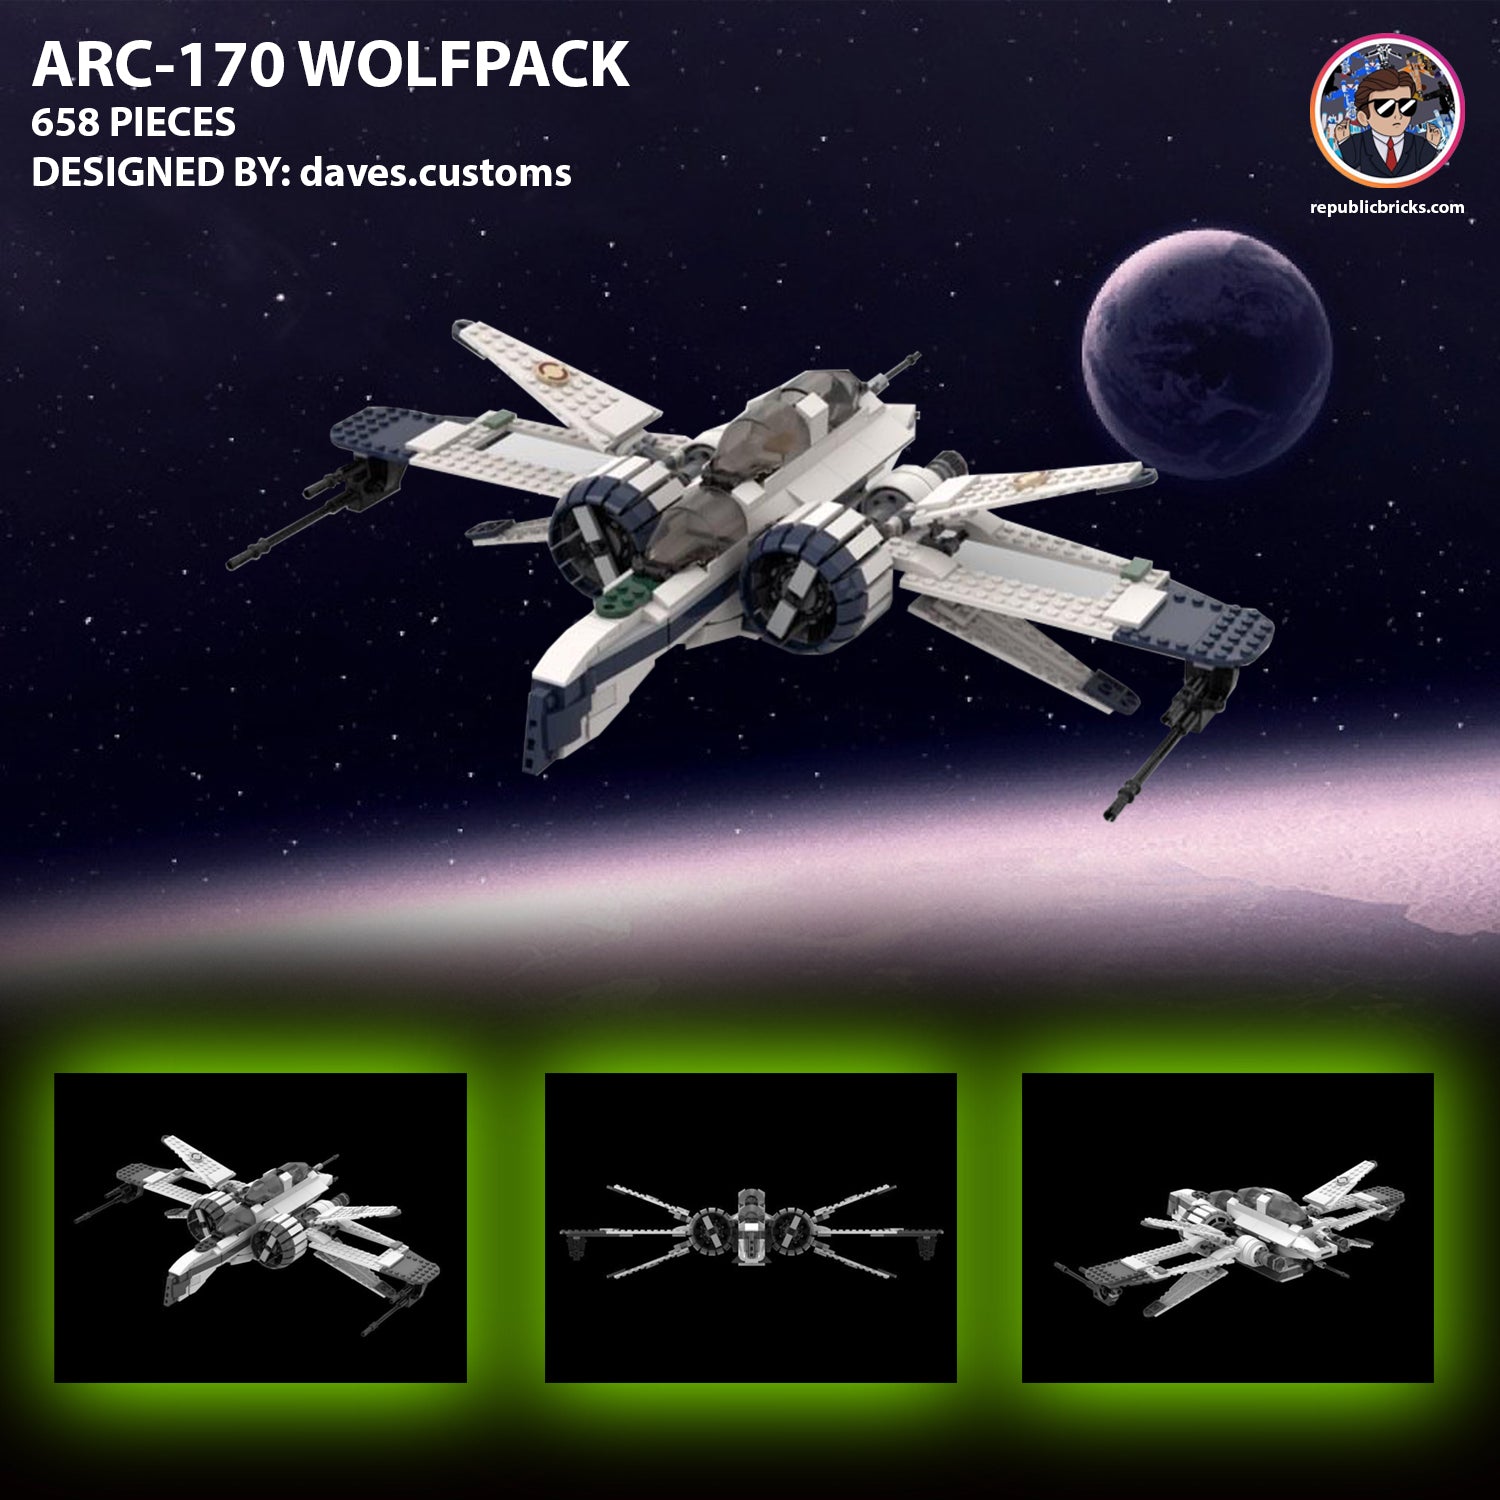 WOLFPACK ARC 170